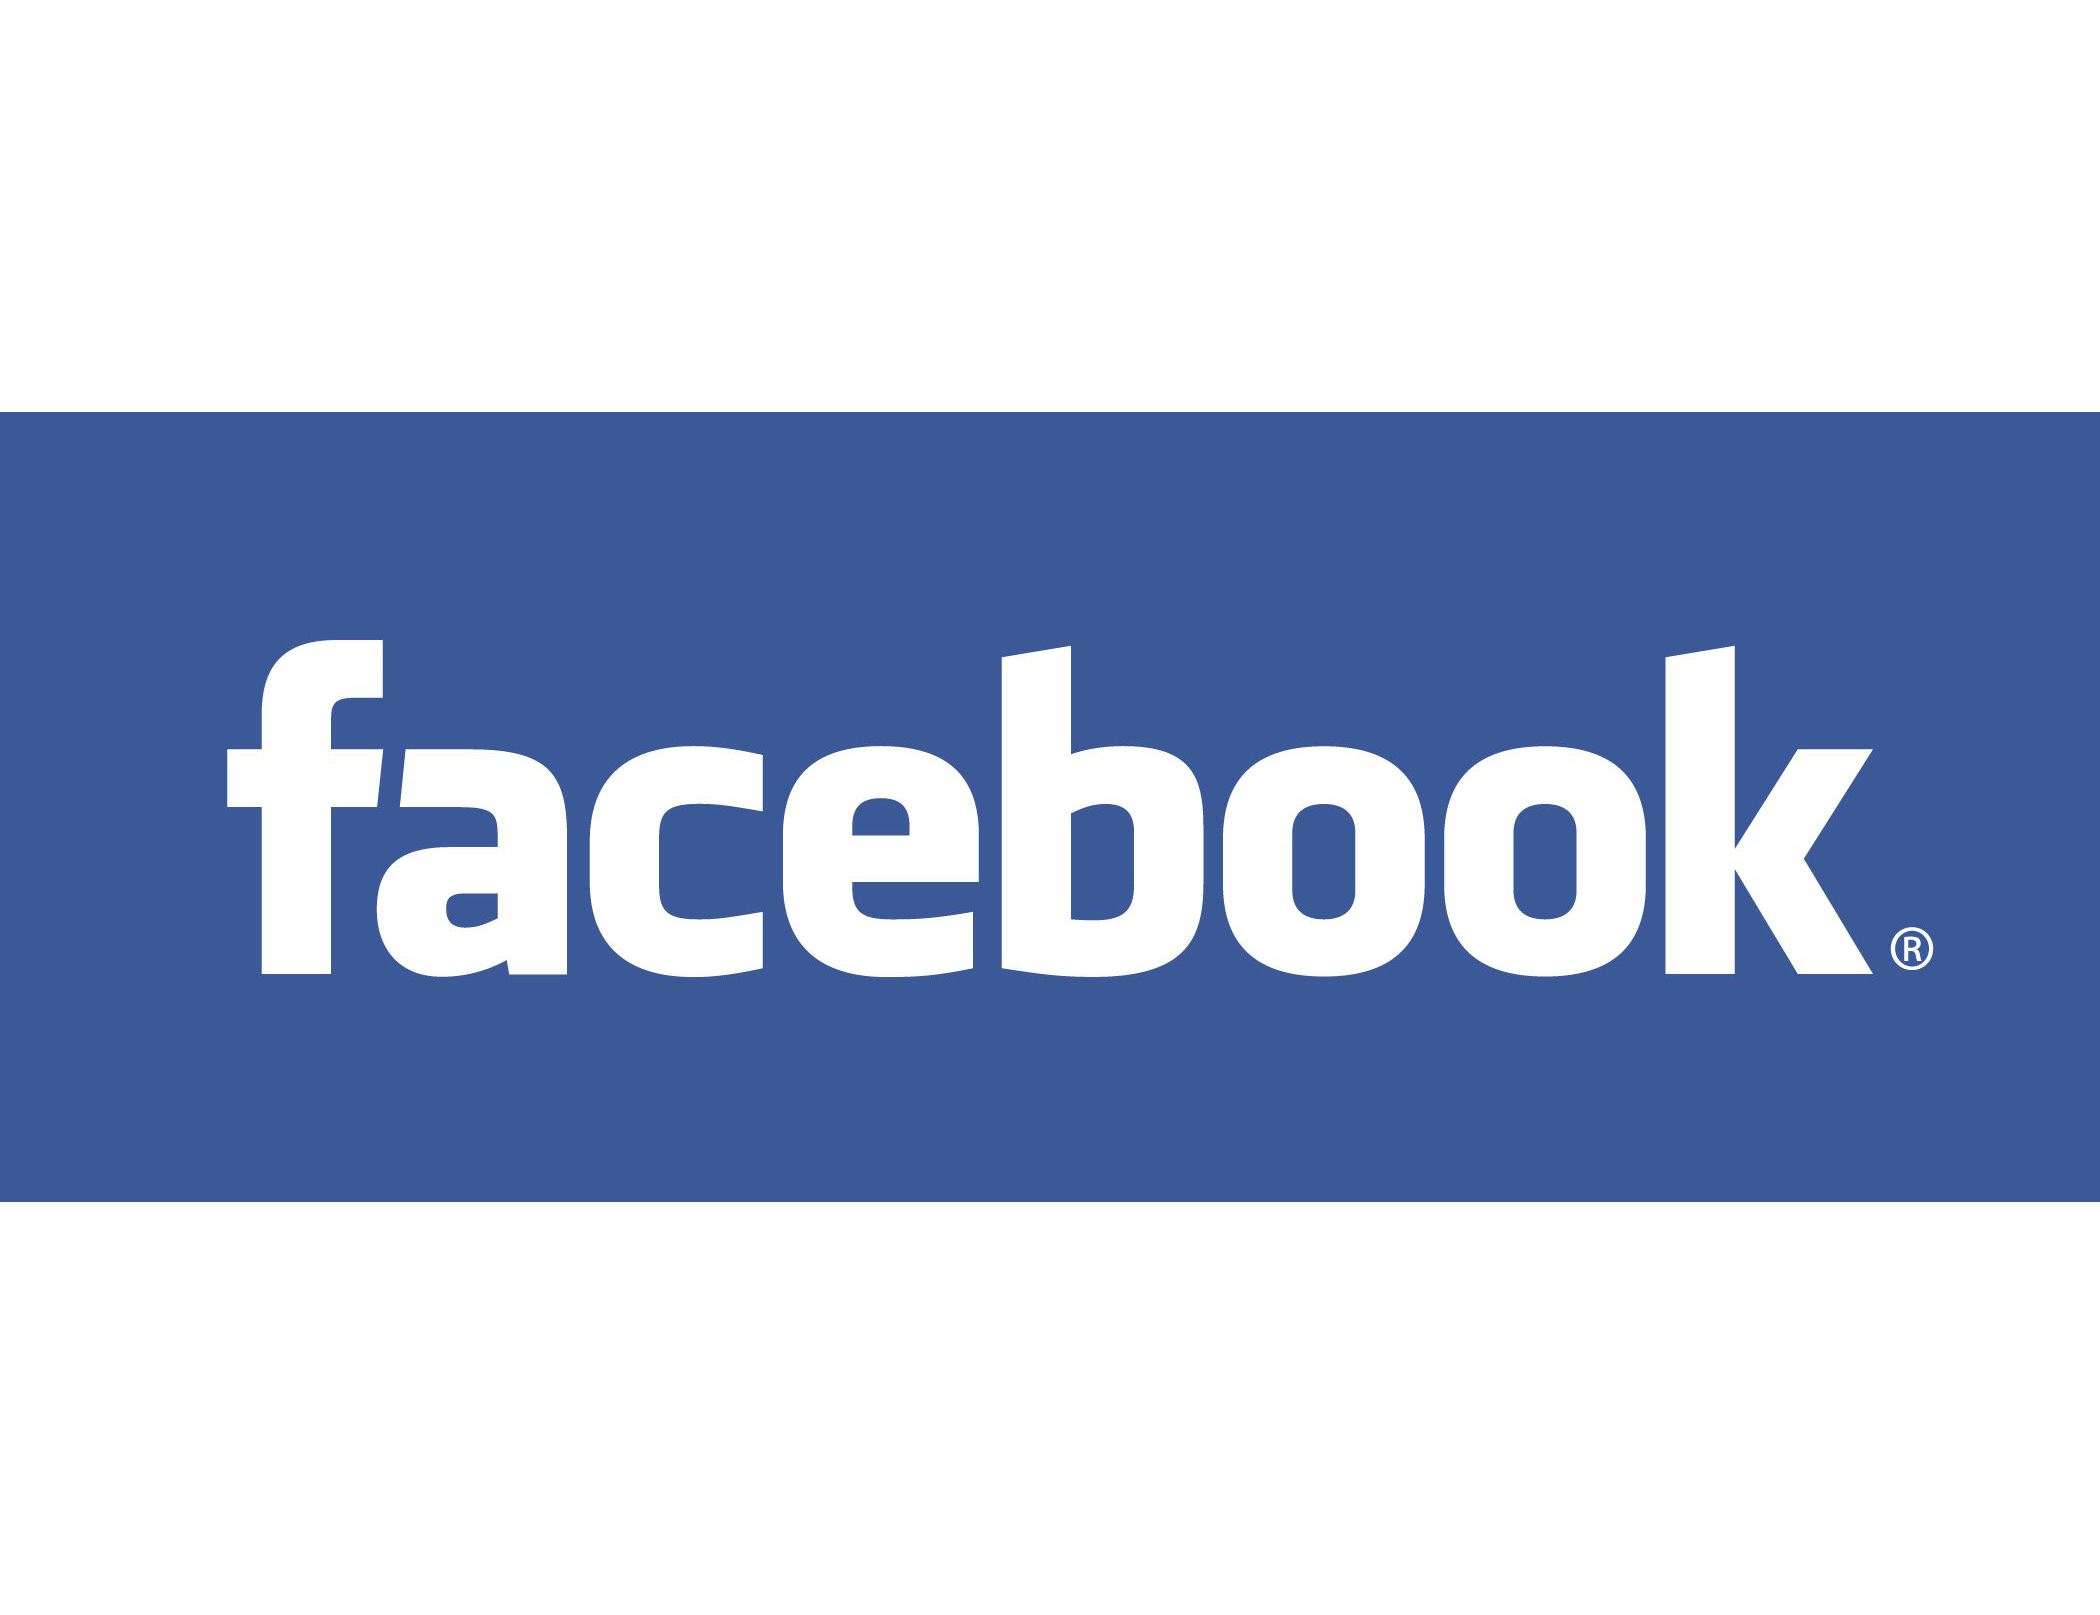 How To Create A Facebook Account With Maximum Privacy Practical Help